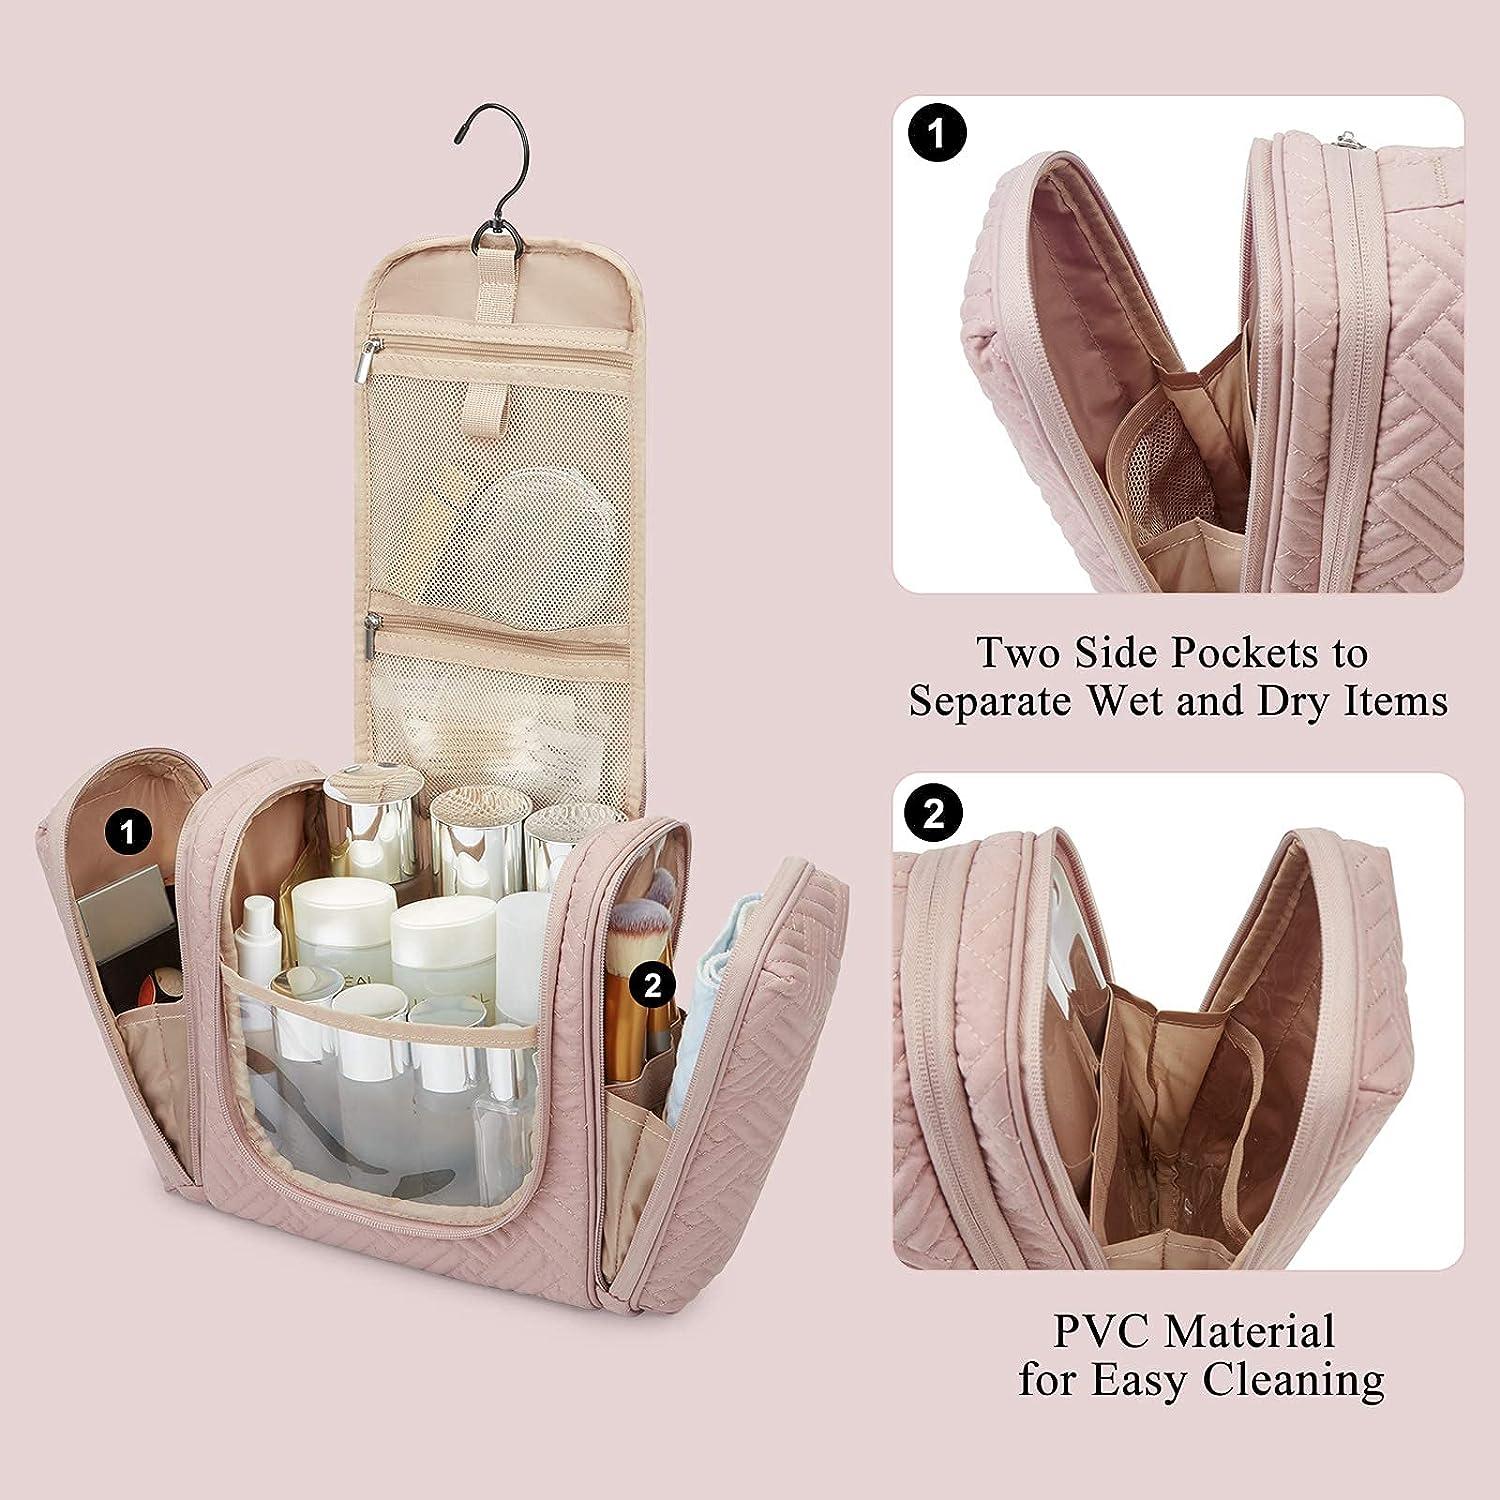 Travel Toiletry Organizer with hanging hook - Baby Pink